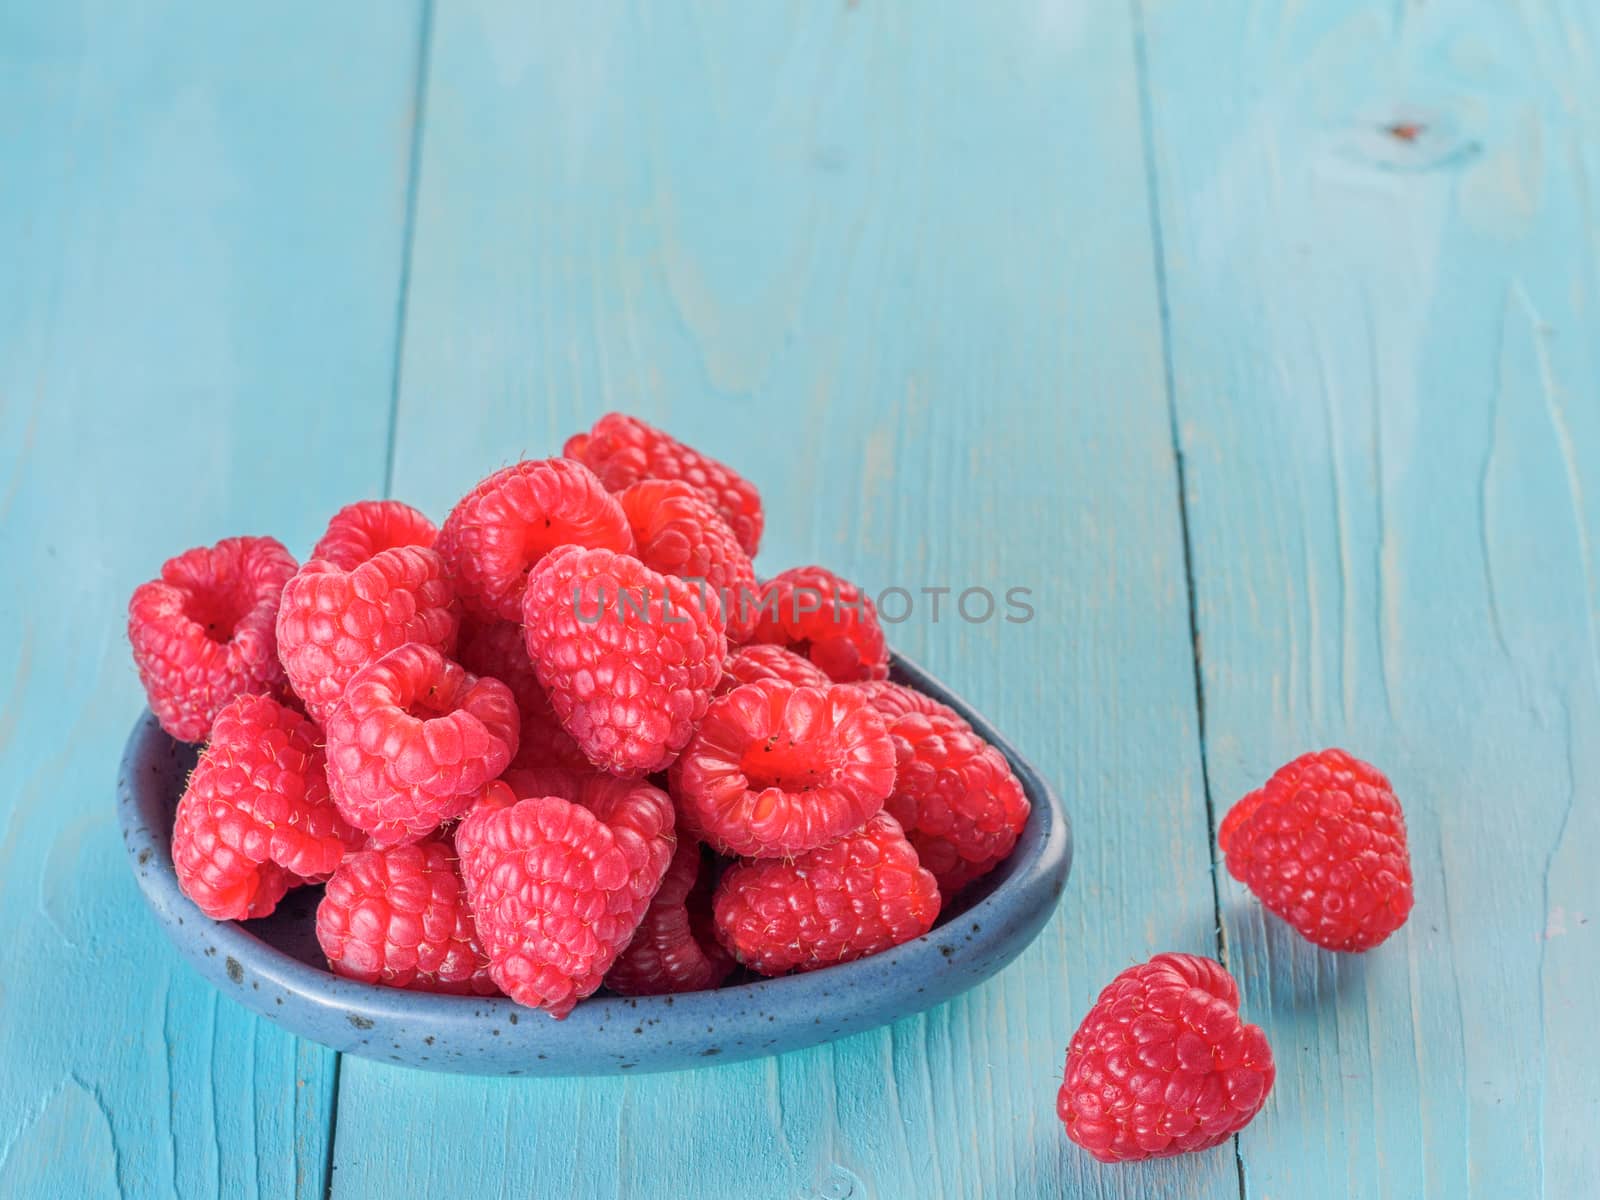 Fresh raspberries on blue wooden background. Raspberry in blue trandy plate. Summer and healthy food concept. Copy space.